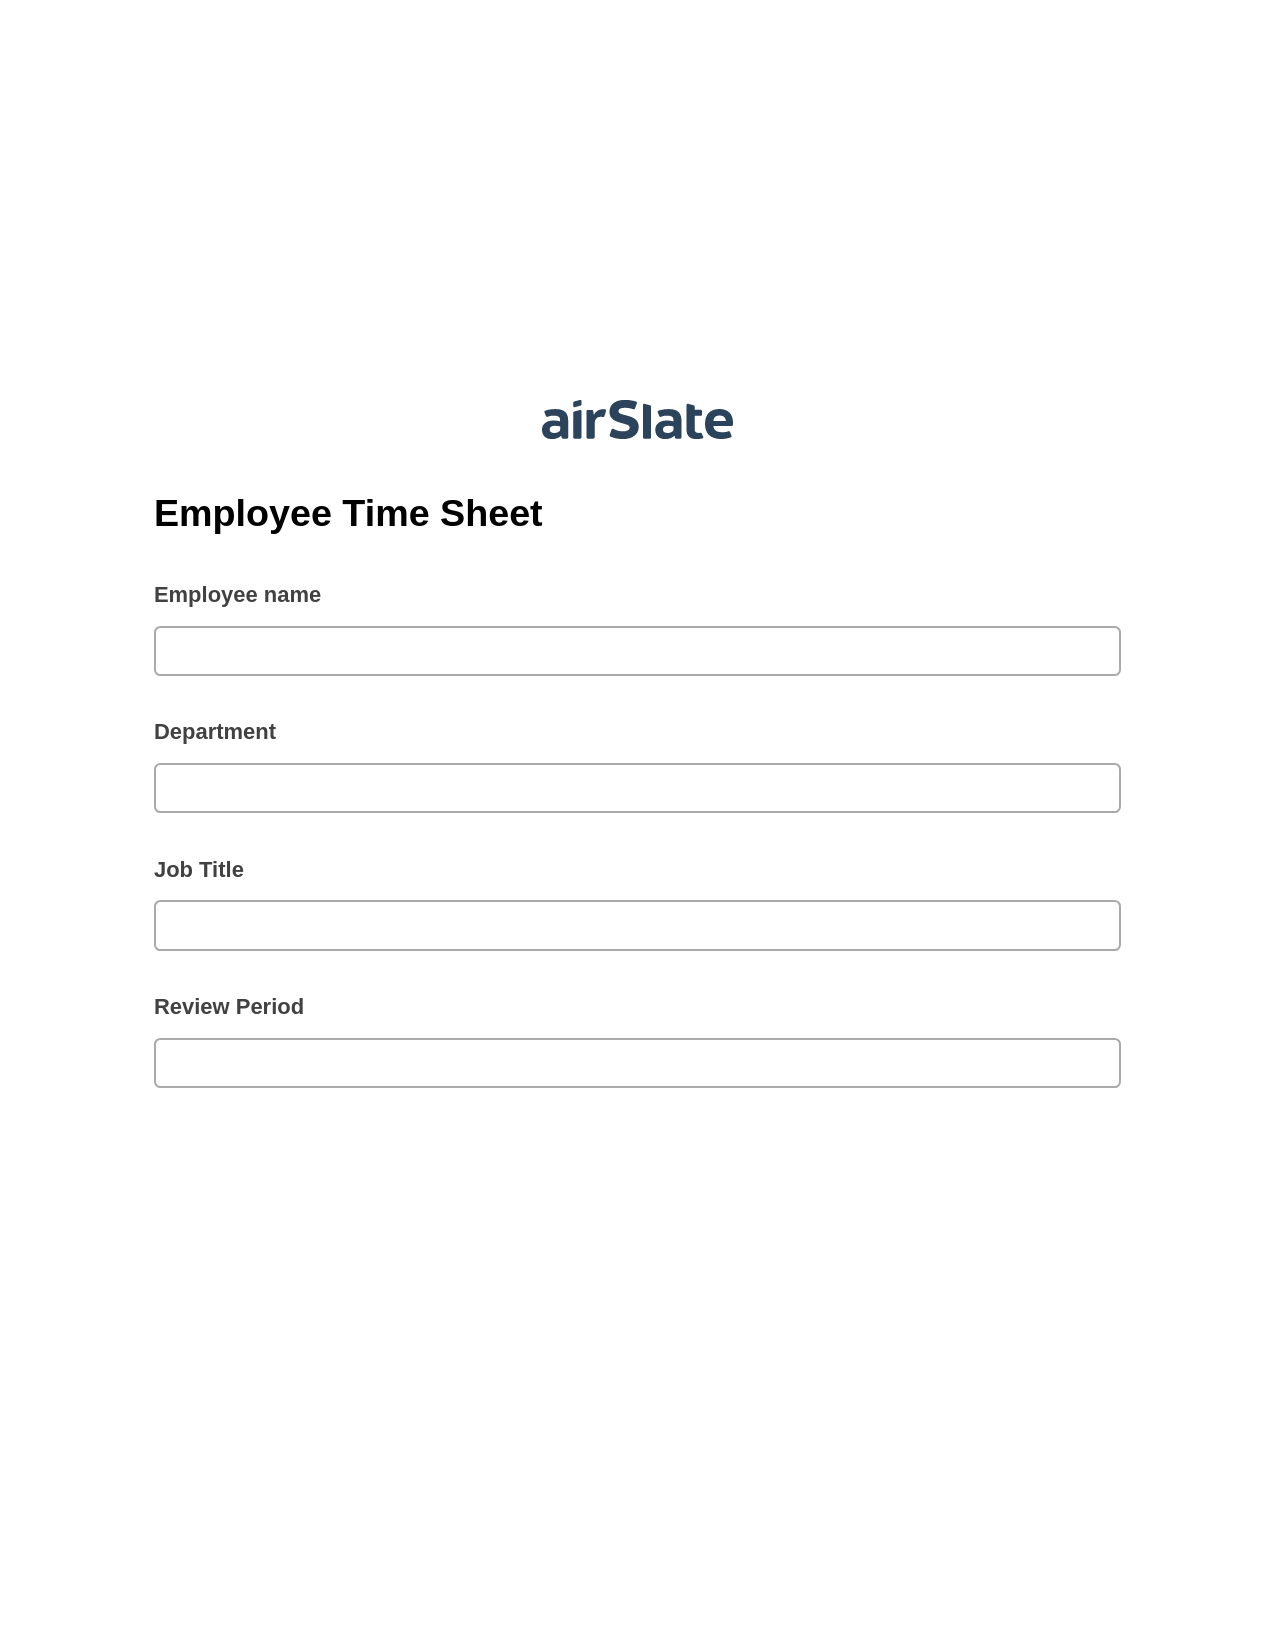 Multirole Employee Time Sheet Pre-fill Dropdowns from MySQL Bot, Create slate addon, Export to Excel 365 Bot